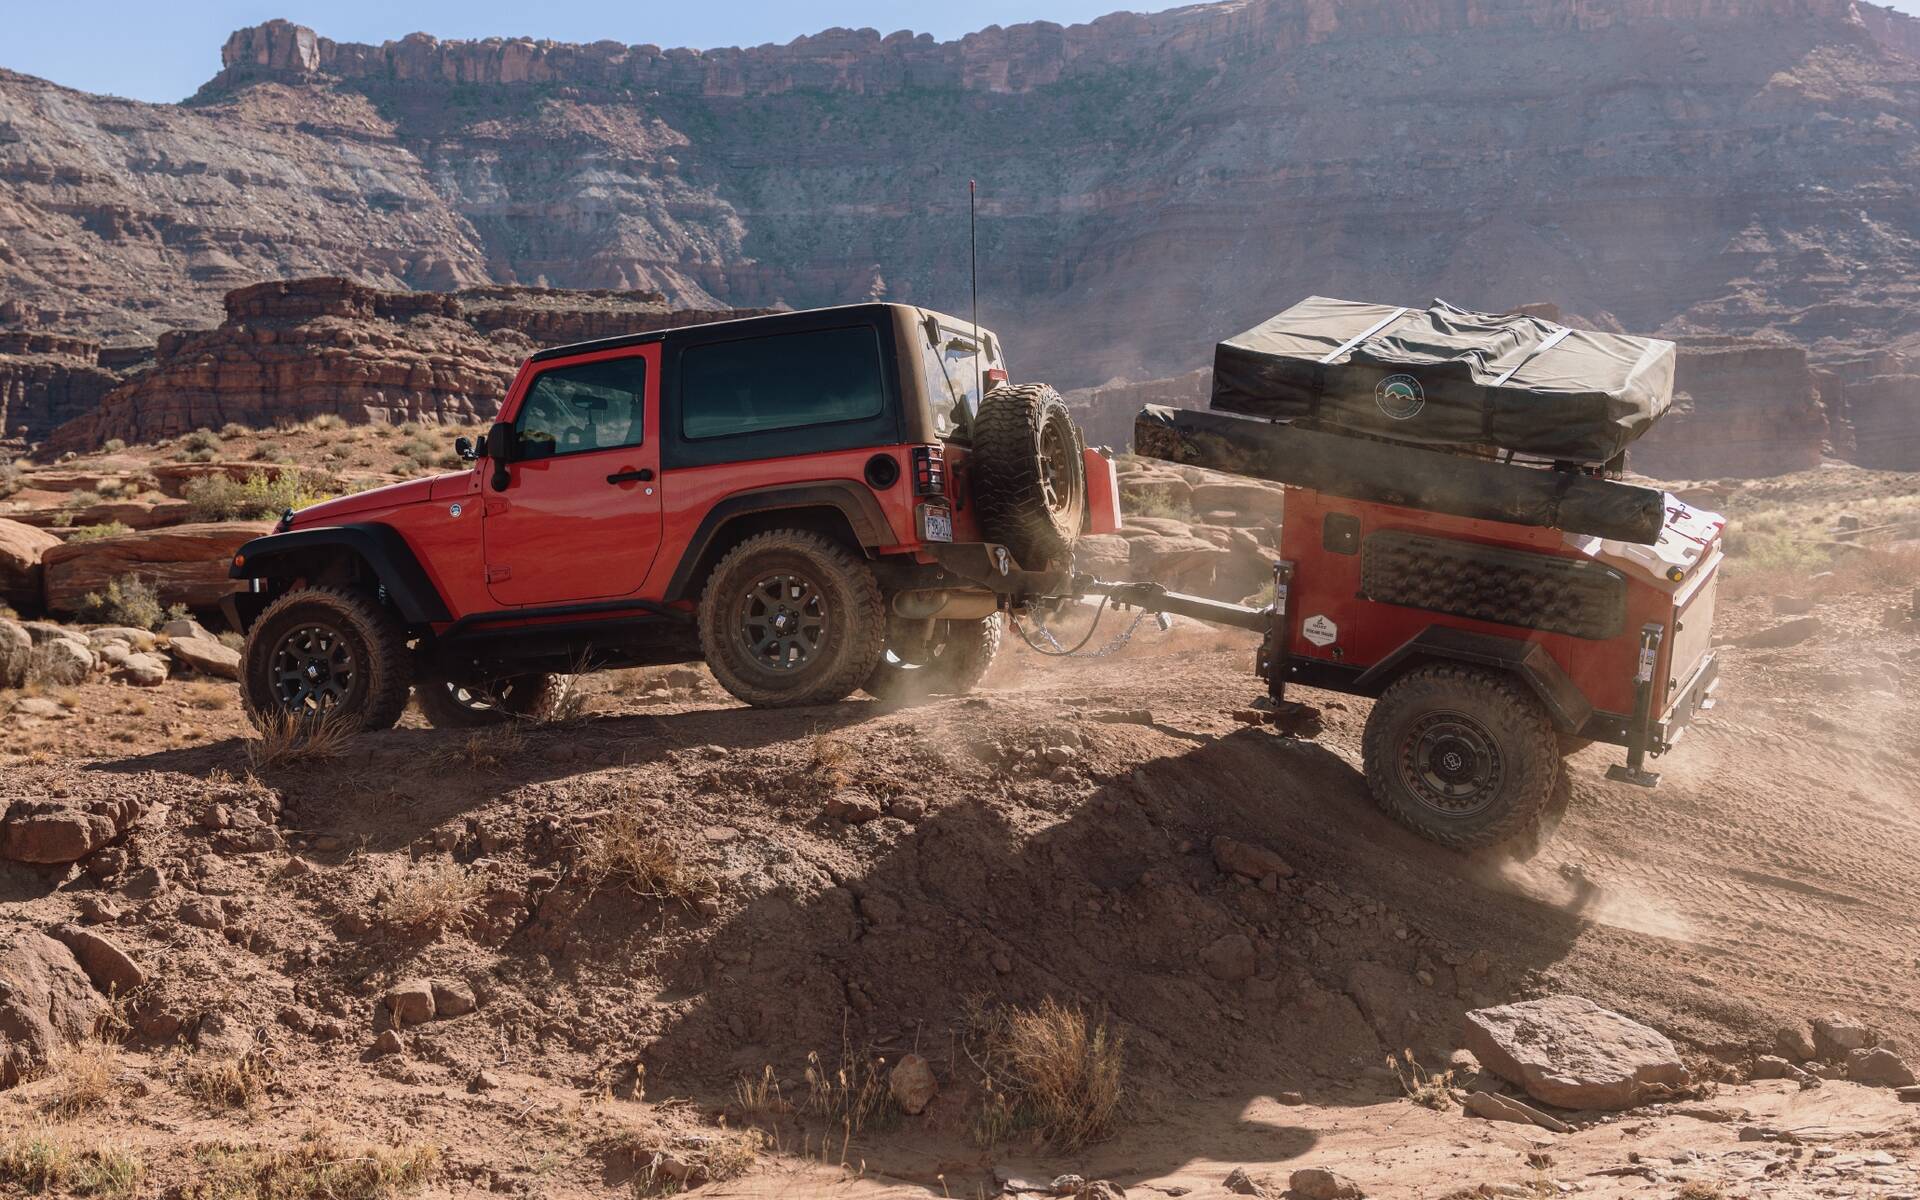 At Last There's a Trailer That Can Follow Your Jeep Wrangler Anywhere - The  Car Guide